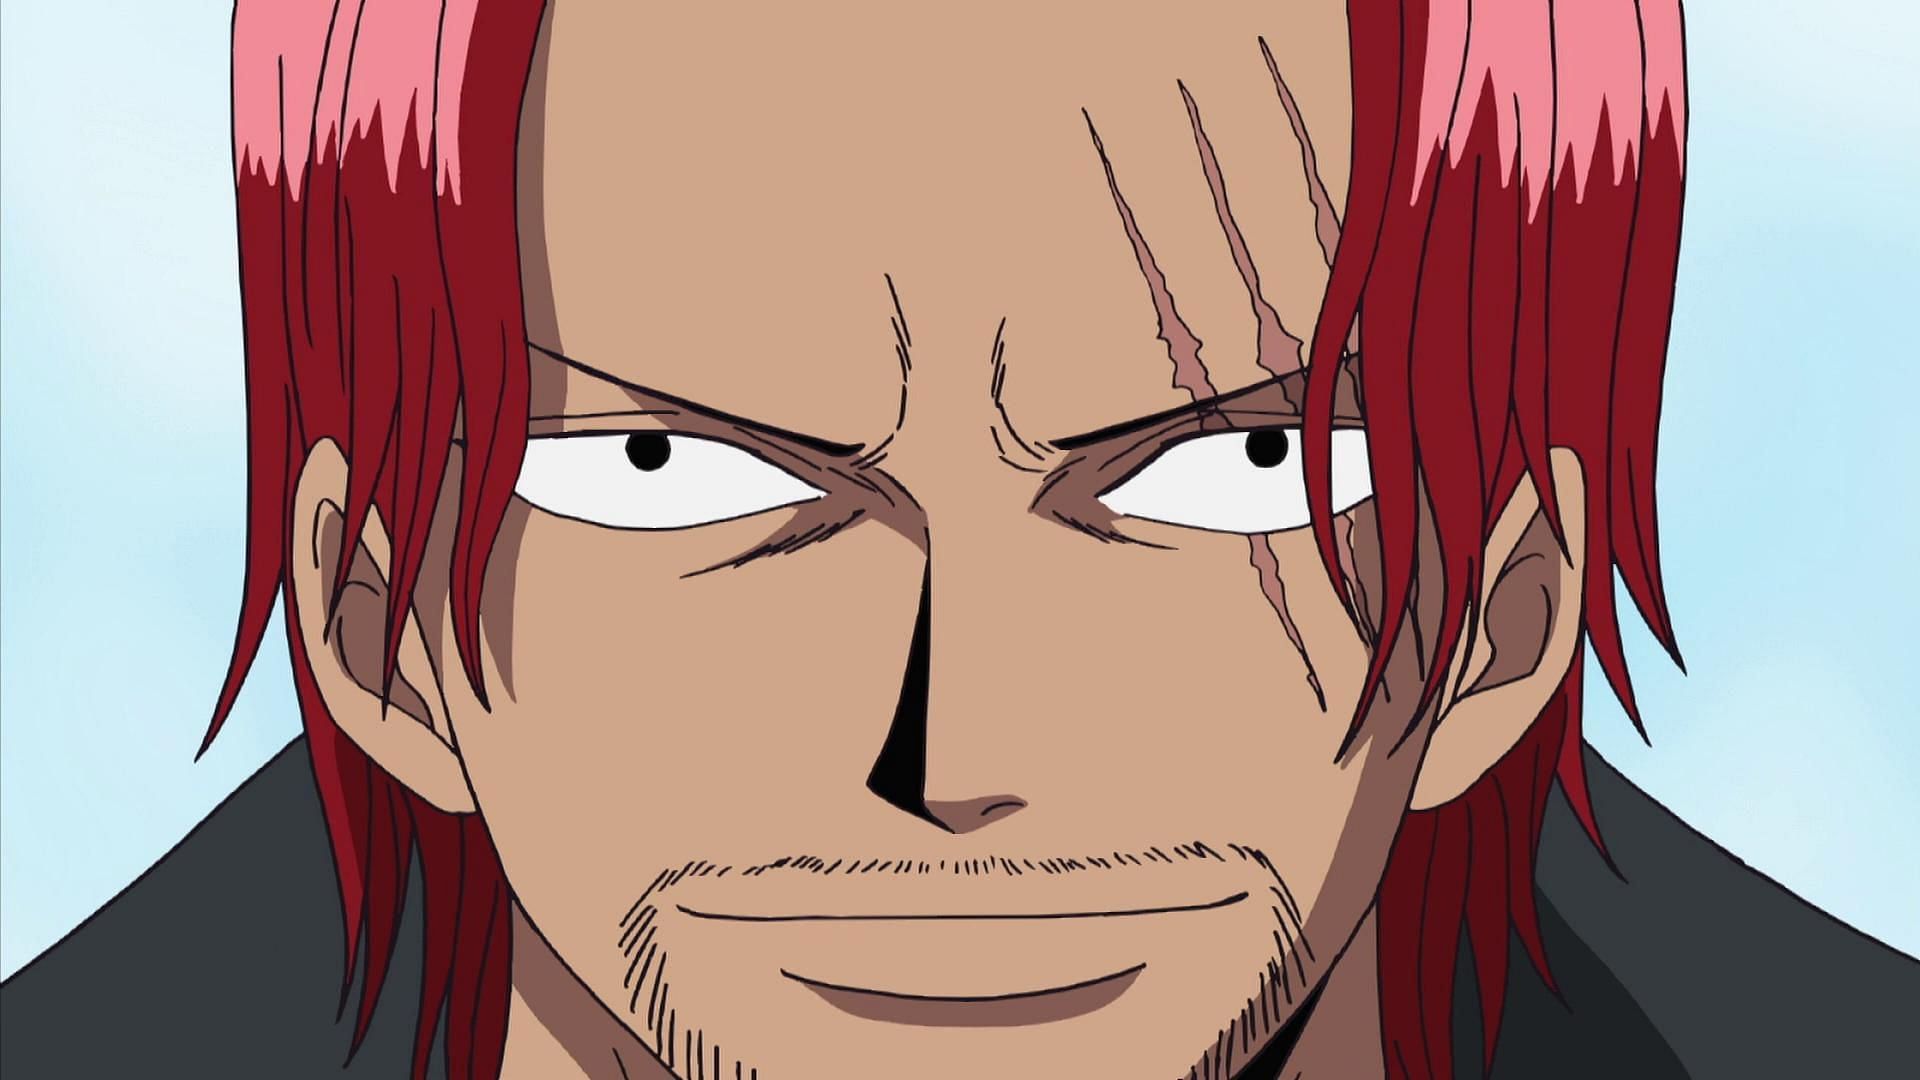 Every main event in One Piece involves Shanks (Image via Toei Animation, One Piece)